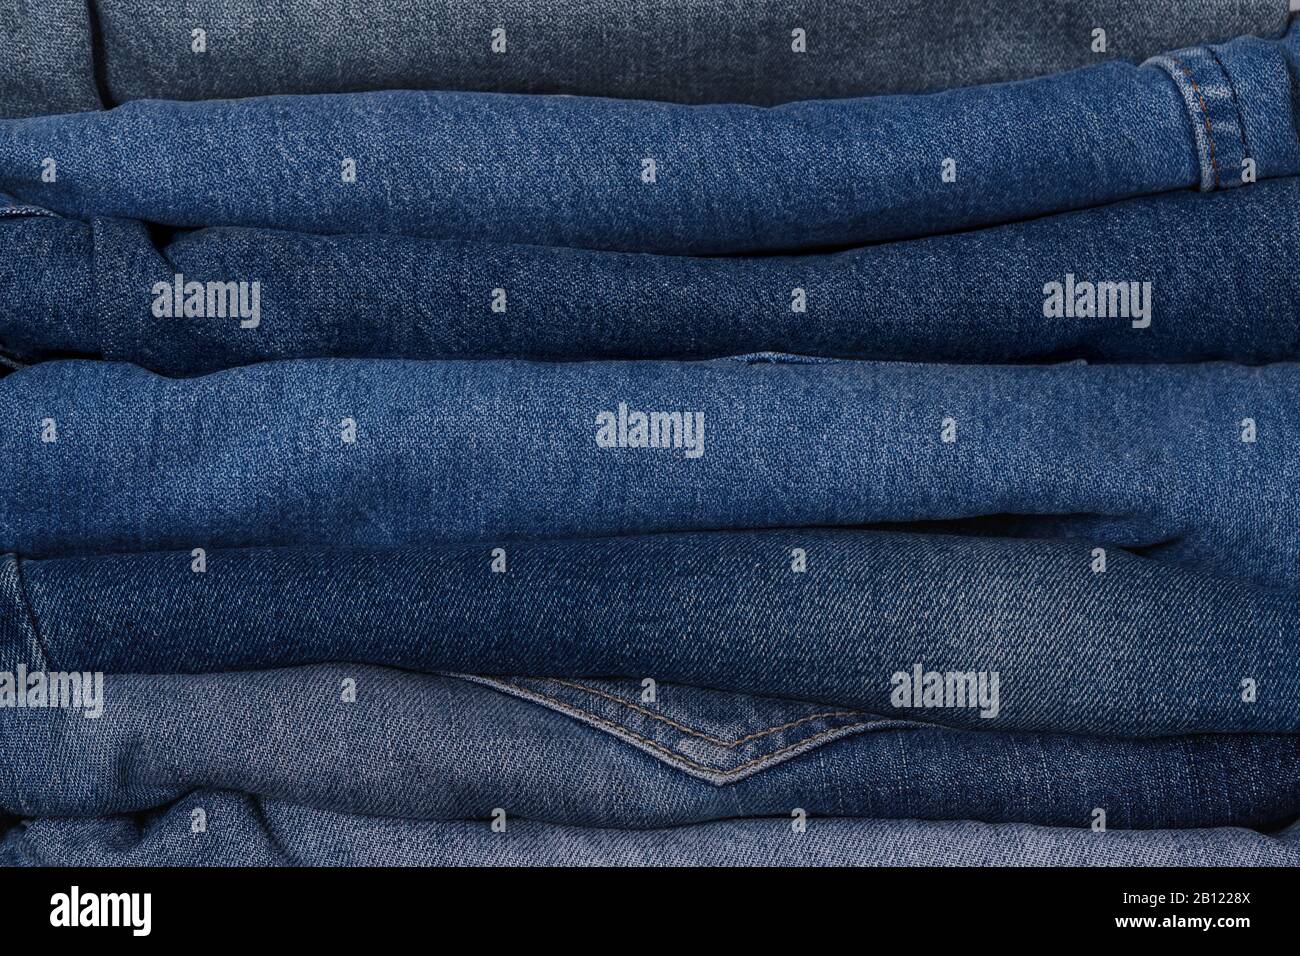 Pile of denim blue jeans texture in the classic indigo style in ...